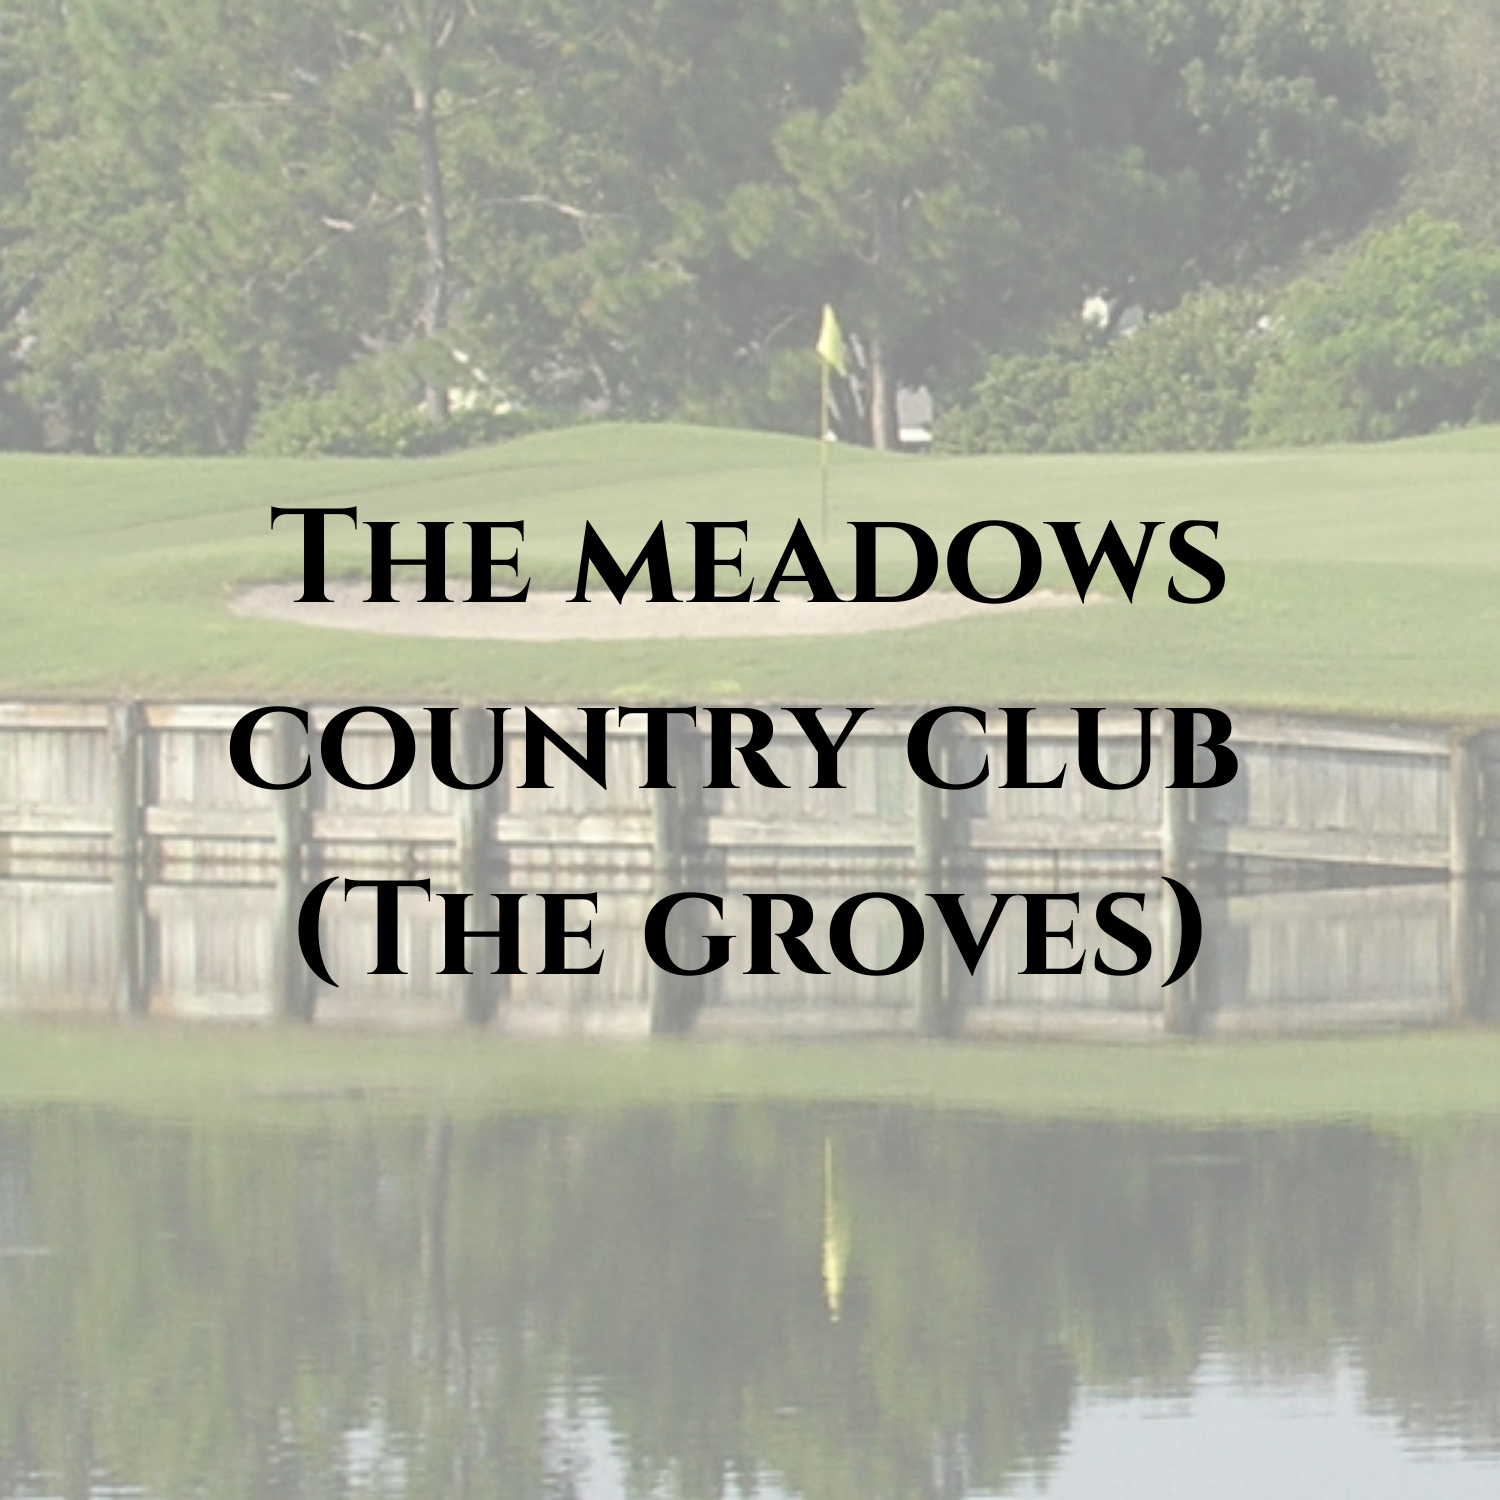 The Meadows Country Club (The Groves) 1x1 thumbnails for website 2.png